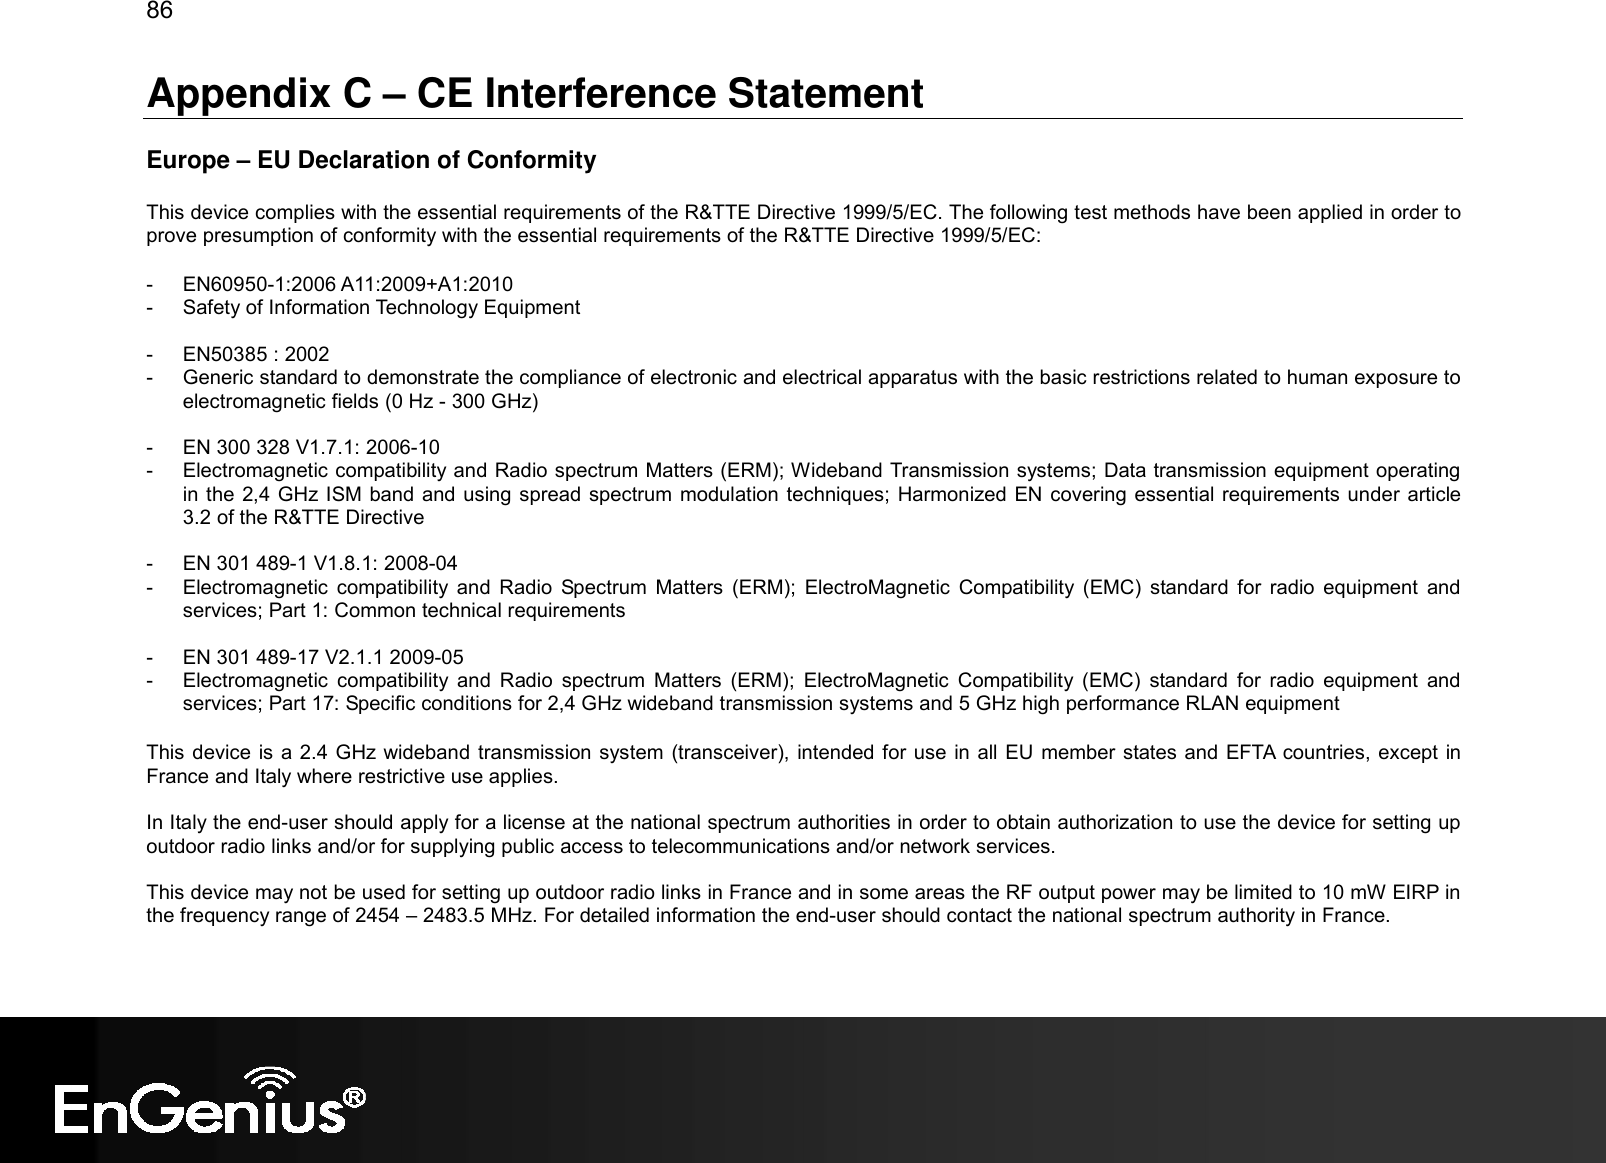 86  Appendix C – CE Interference Statement  Europe – EU Declaration of Conformity  This device complies with the essential requirements of the R&amp;TTE Directive 1999/5/EC. The following test methods have been applied in order to prove presumption of conformity with the essential requirements of the R&amp;TTE Directive 1999/5/EC:  -  EN60950-1:2006 A11:2009+A1:2010 -  Safety of Information Technology Equipment  -  EN50385 : 2002 -  Generic standard to demonstrate the compliance of electronic and electrical apparatus with the basic restrictions related to human exposure to electromagnetic fields (0 Hz - 300 GHz)  -  EN 300 328 V1.7.1: 2006-10 -  Electromagnetic compatibility and Radio spectrum Matters (ERM); Wideband Transmission systems; Data transmission equipment operating in the 2,4 GHz ISM band and using spread spectrum modulation techniques; Harmonized EN covering essential requirements under article 3.2 of the R&amp;TTE Directive  -  EN 301 489-1 V1.8.1: 2008-04 -  Electromagnetic  compatibility  and  Radio  Spectrum  Matters  (ERM);  ElectroMagnetic  Compatibility  (EMC)  standard  for  radio  equipment  and services; Part 1: Common technical requirements  -  EN 301 489-17 V2.1.1 2009-05  -  Electromagnetic  compatibility  and  Radio  spectrum  Matters  (ERM);  ElectroMagnetic  Compatibility  (EMC)  standard  for  radio  equipment  and services; Part 17: Specific conditions for 2,4 GHz wideband transmission systems and 5 GHz high performance RLAN equipment  This device is a 2.4 GHz wideband transmission system (transceiver), intended for use in all EU member states and EFTA  countries, except in France and Italy where restrictive use applies.  In Italy the end-user should apply for a license at the national spectrum authorities in order to obtain authorization to use the device for setting up outdoor radio links and/or for supplying public access to telecommunications and/or network services.  This device may not be used for setting up outdoor radio links in France and in some areas the RF output power may be limited to 10 mW EIRP in the frequency range of 2454 – 2483.5 MHz. For detailed information the end-user should contact the national spectrum authority in France.  